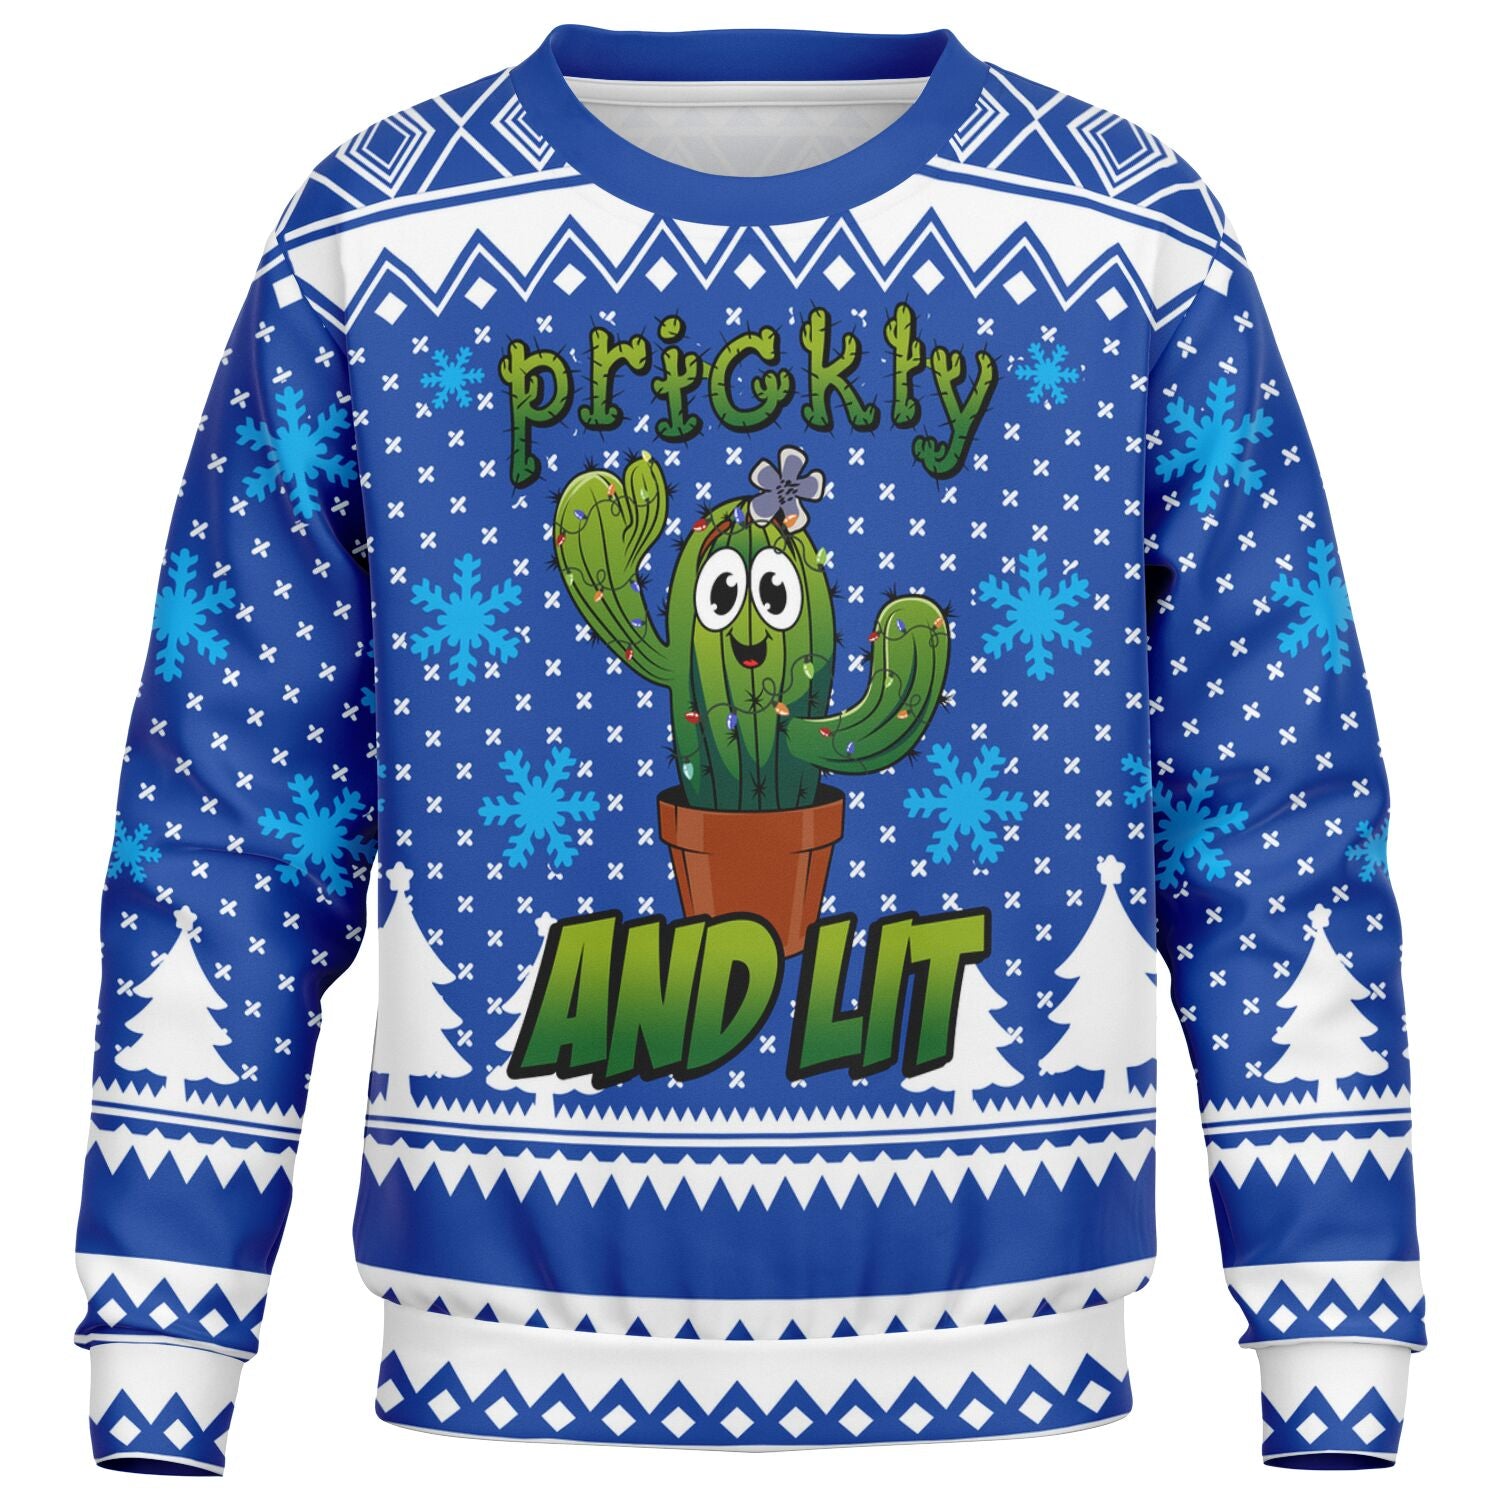 Ugly Holiday Sweater-Prickly and Lit-Kids/Youth